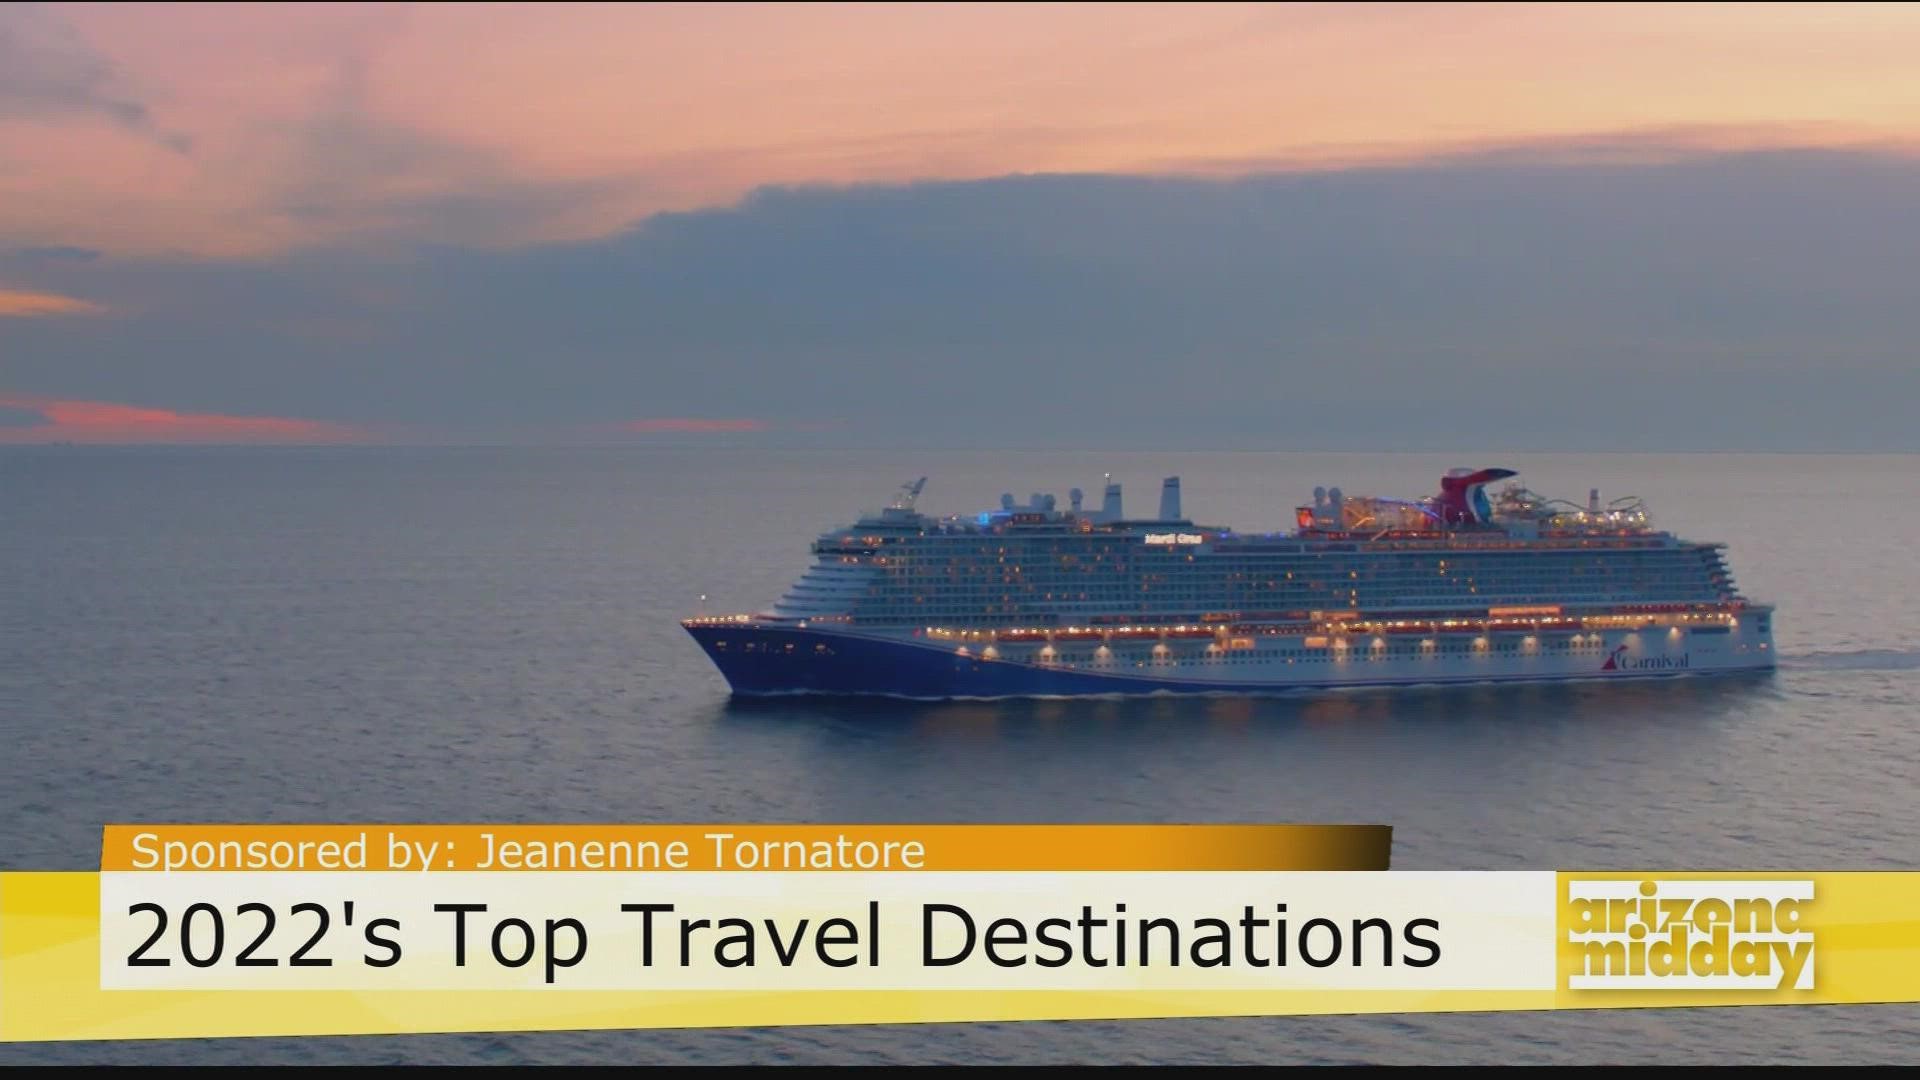 Travel Expert, Jeanenne Tornatore, shares her top travel predictions in the new year from cruising to NYC!